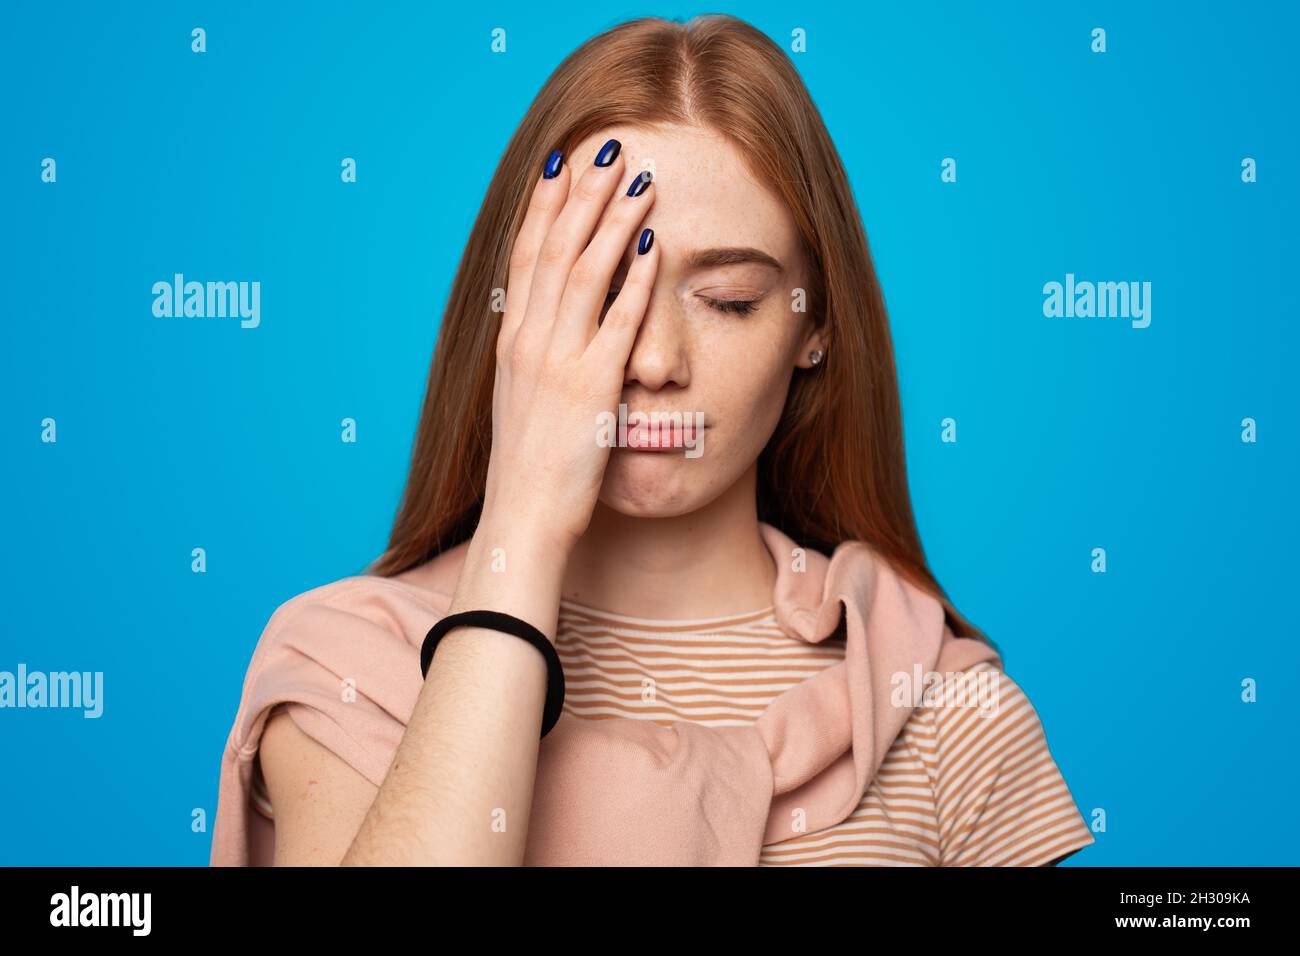 Woman with long red hair covering half of her face with the palm of her right hand. Portrait of a freckled young woman on a blue background Stock Photo